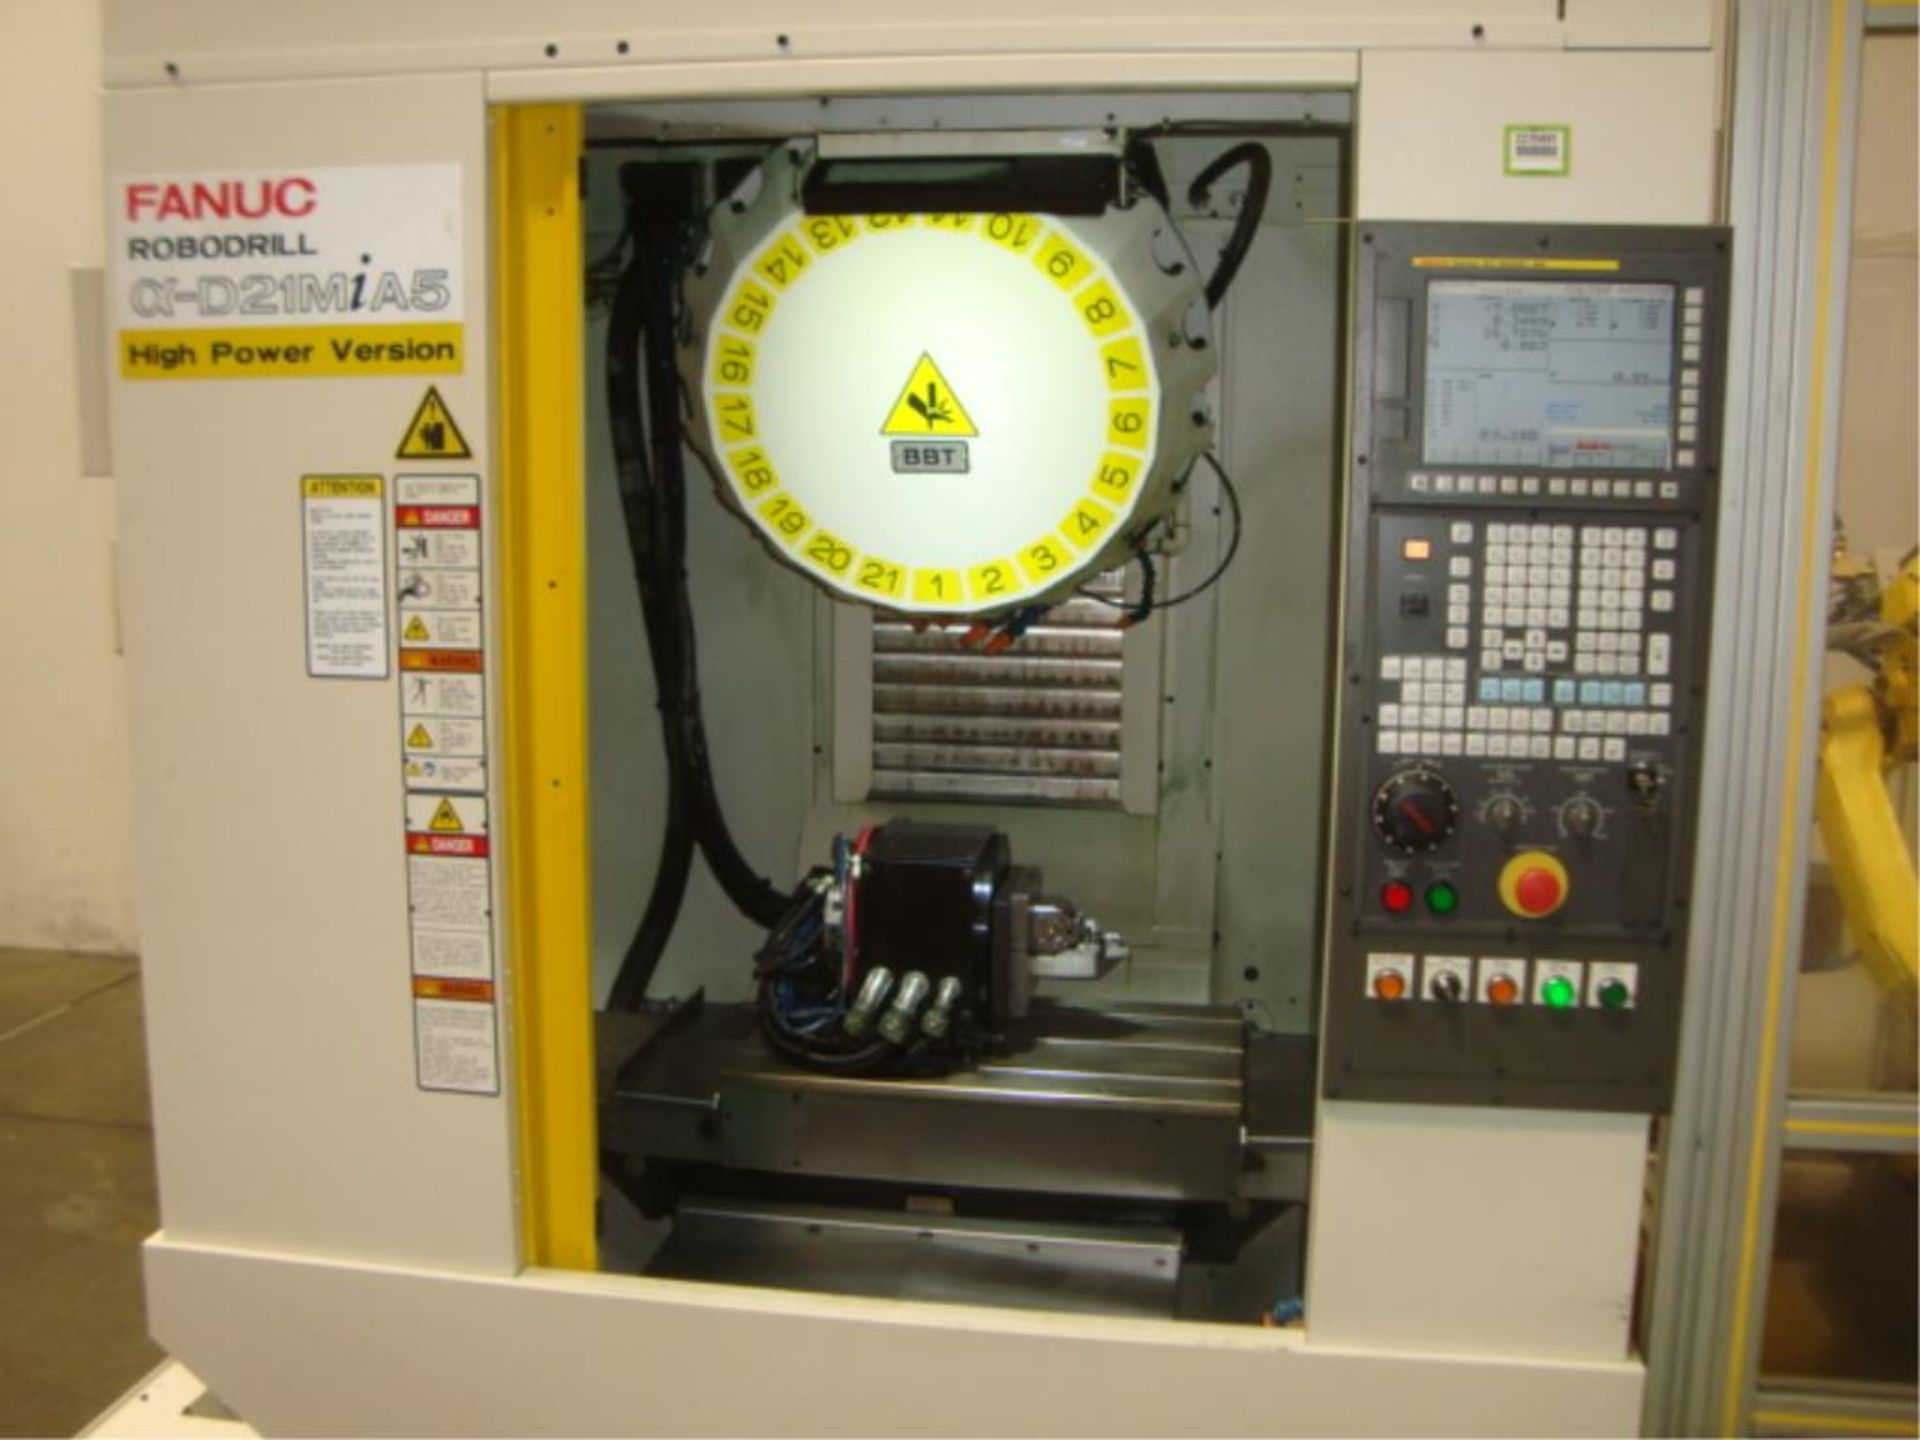 Fanuc Robodrill Alpha-D21MiA5 with Fanuc M-10iA 6-Axis Robot - Image 36 of 60